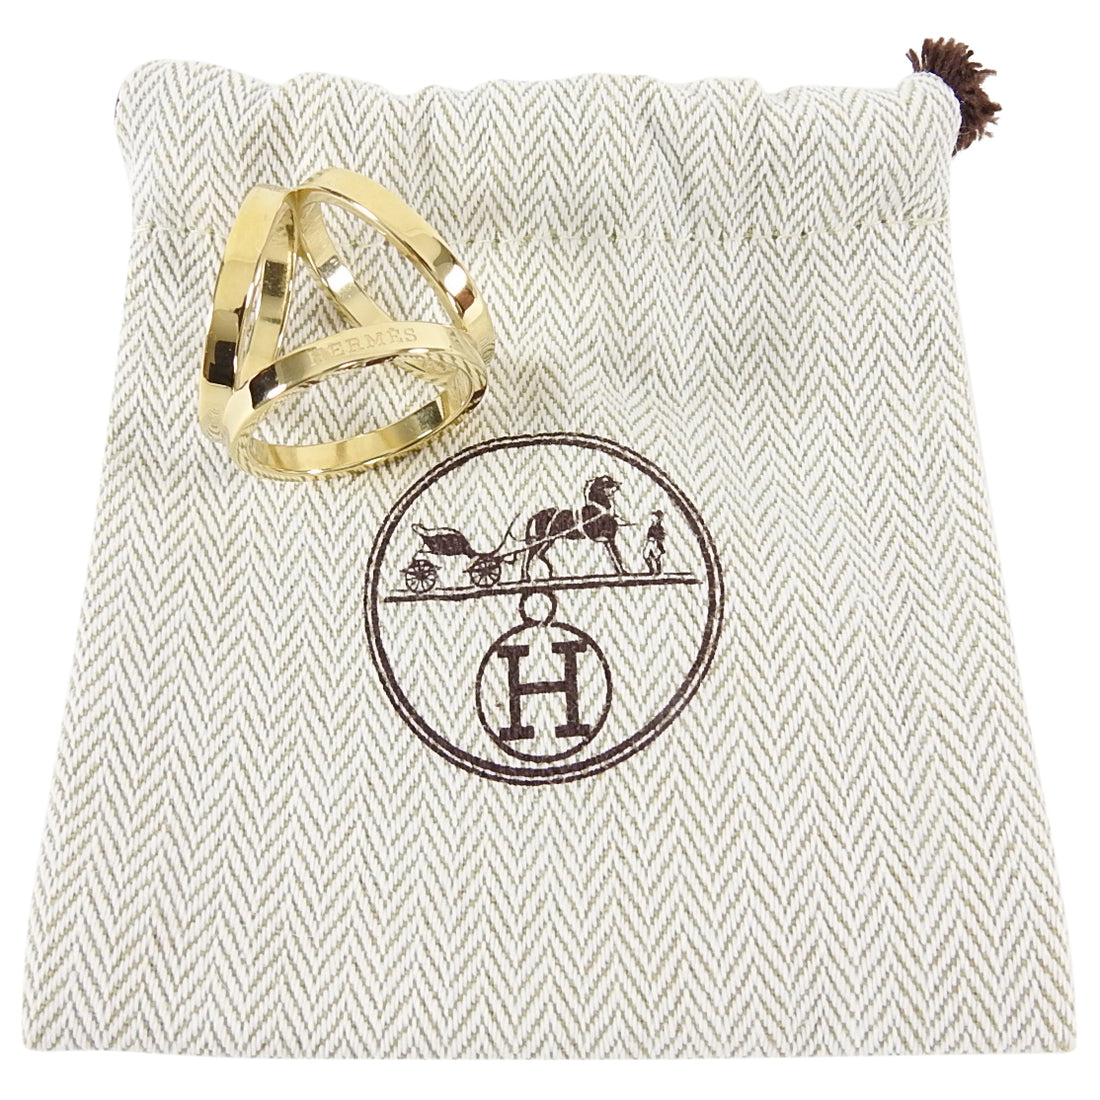 Hermes Gold Plated Trio Scarf Ring - Yoogi's Closet